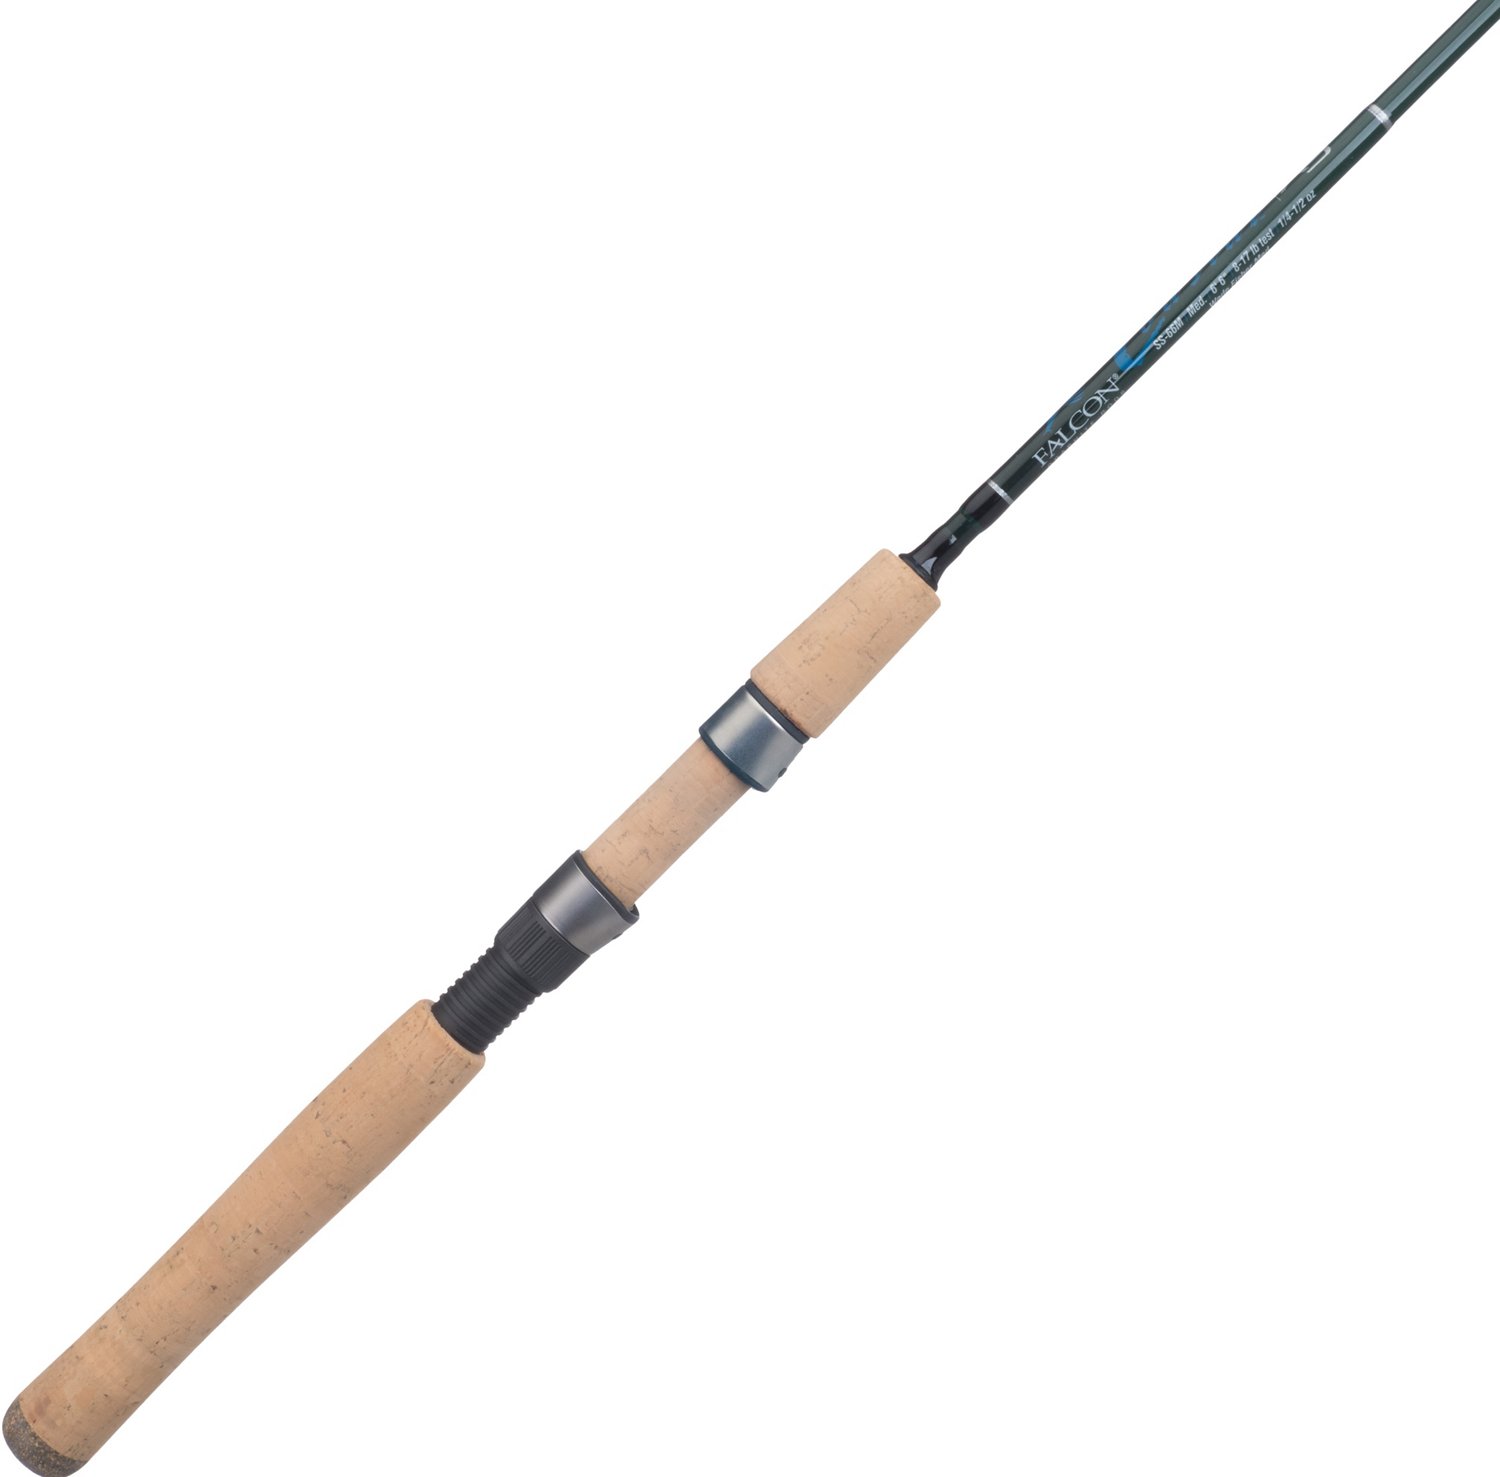 Falcon Coastal XGS 6'6 Saltwater Wade Fisher Spinning Rod